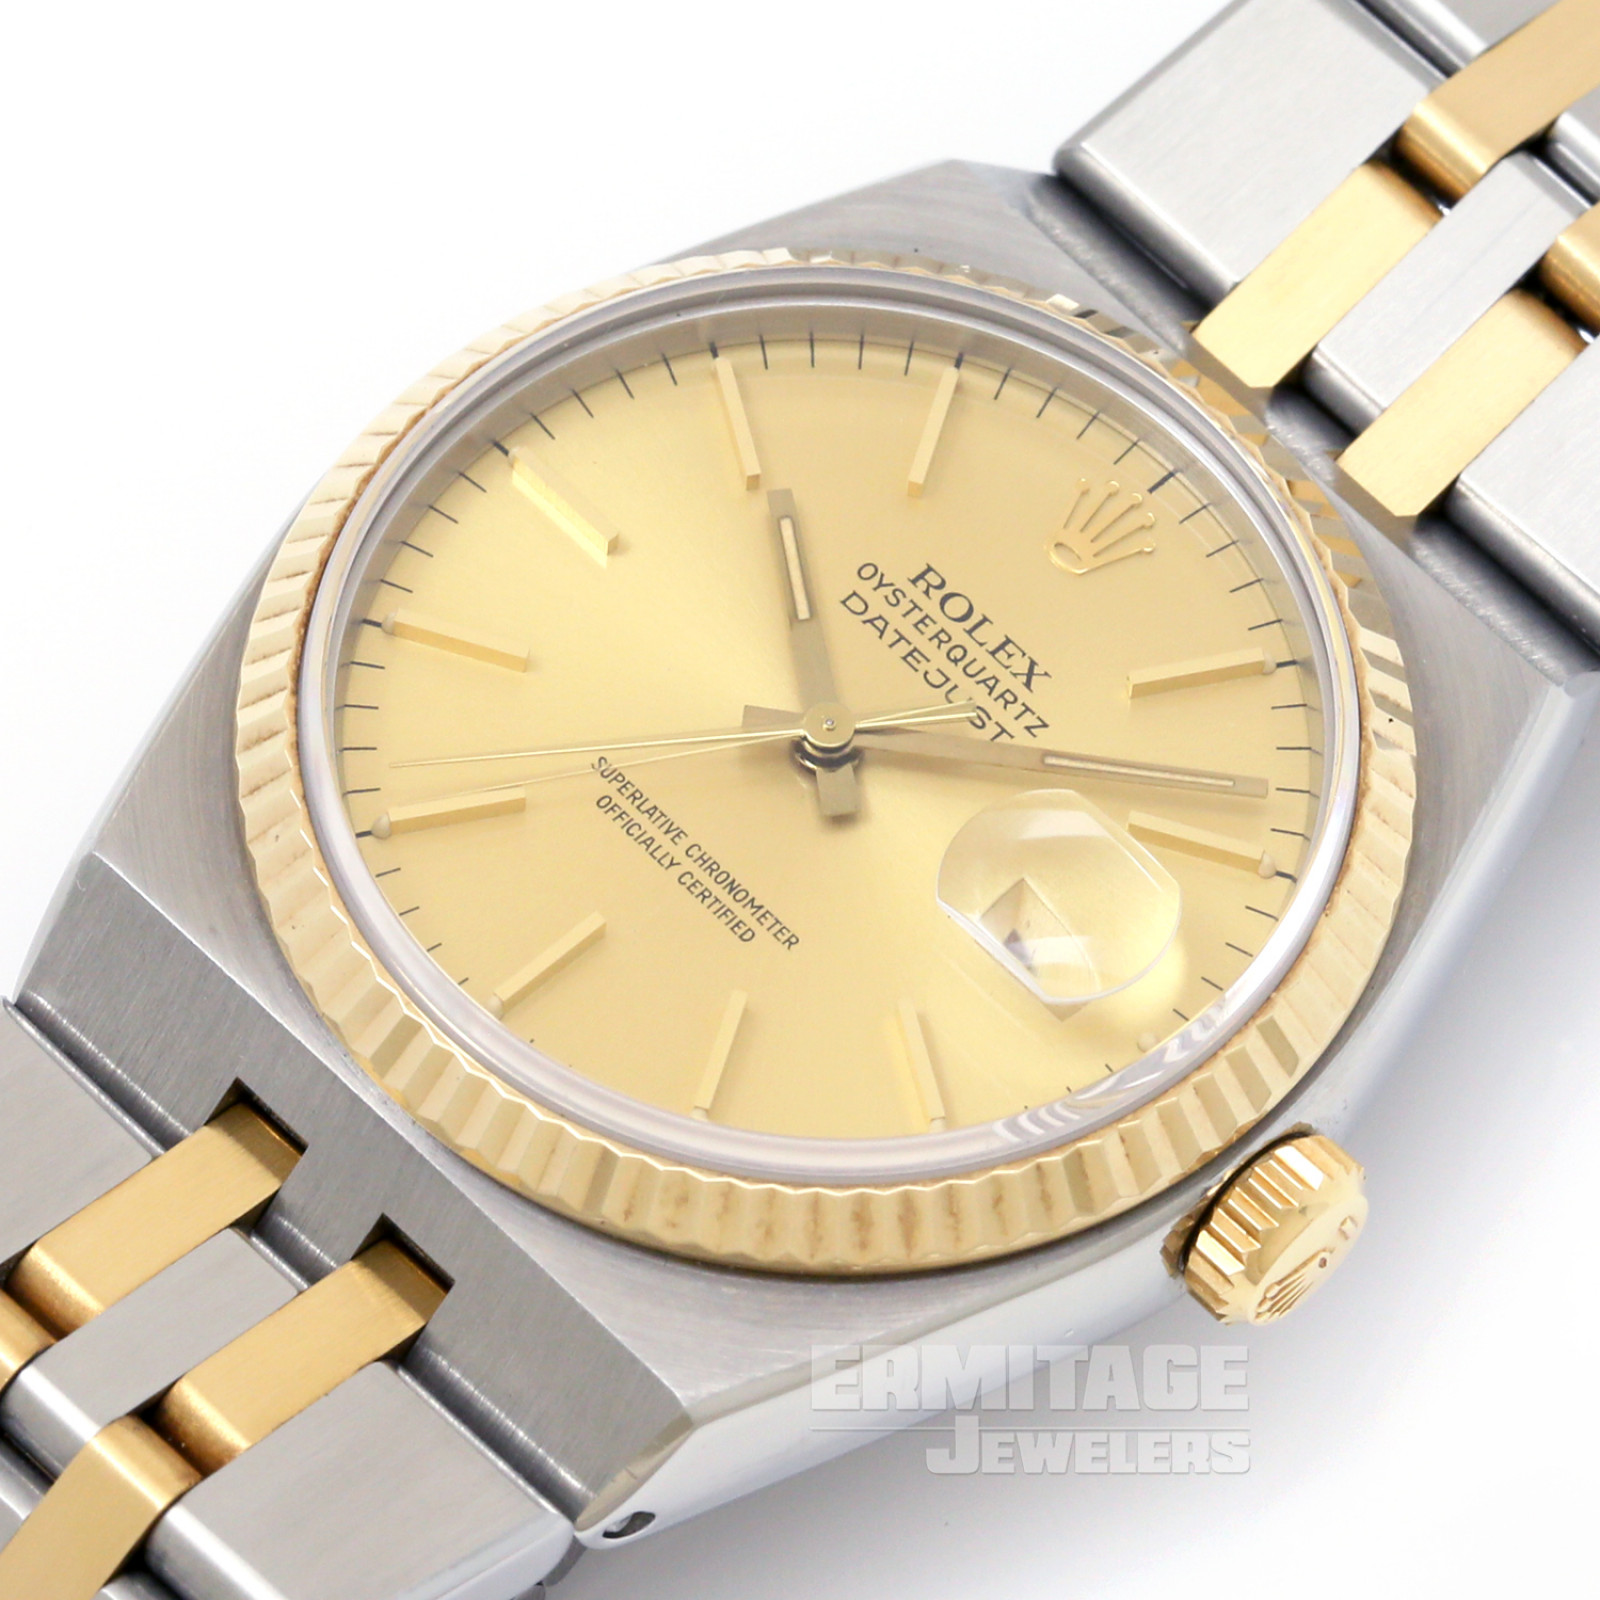 Pre-Owned Rolex Datejust Oysterquartz 17013 Stainless Steel, 18kt Yellow Gold & Stainless Steel 36 mm Gold Index